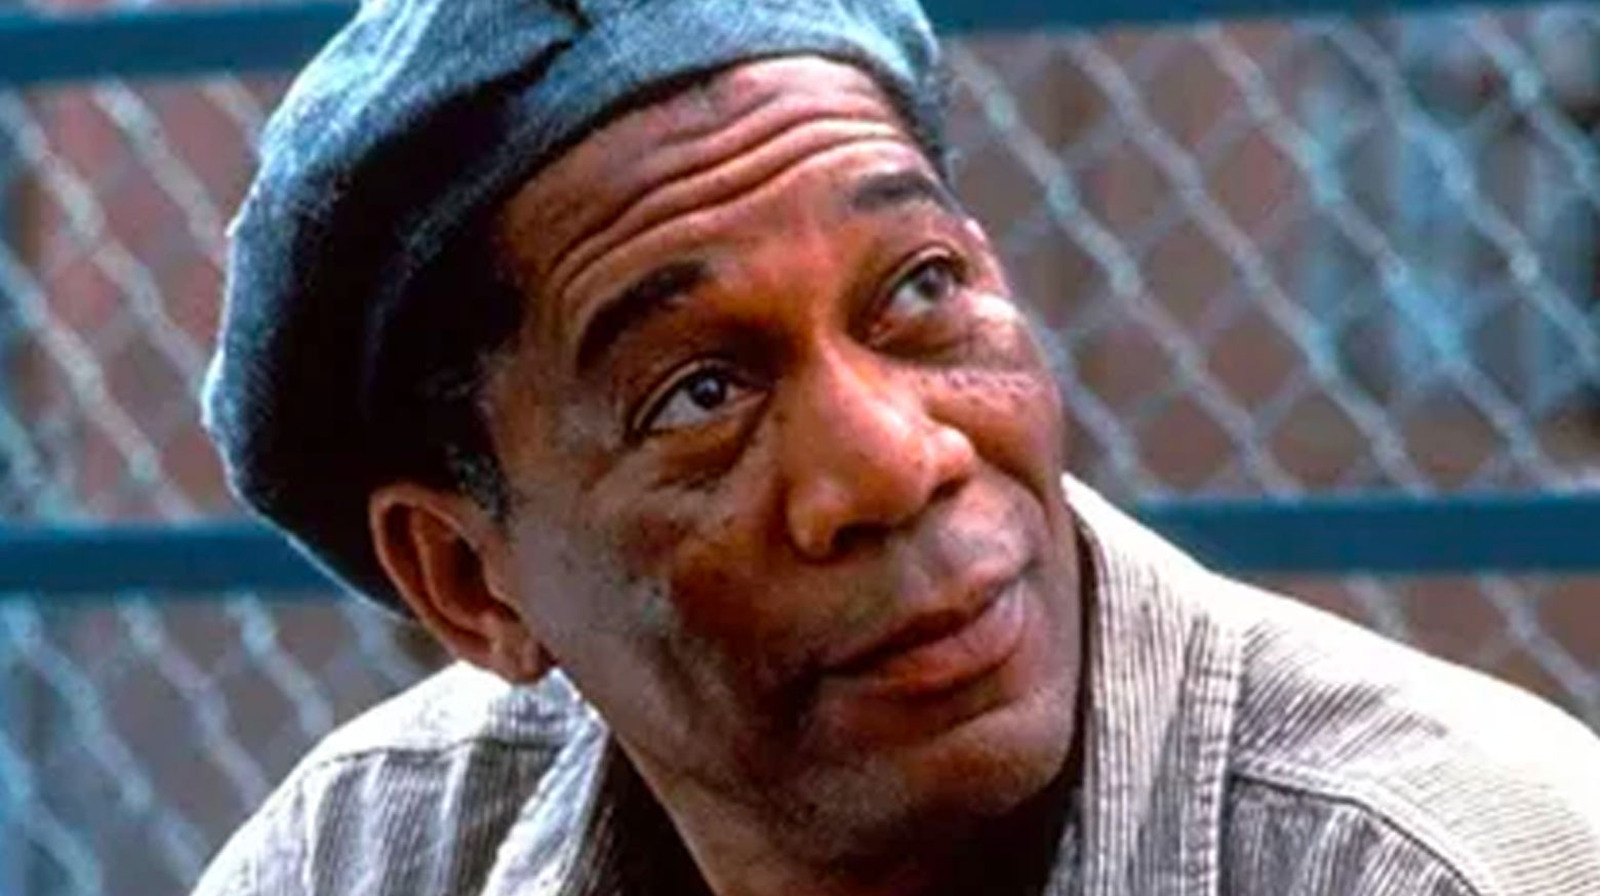 The Reason Red From Shawshank Redemption In Prison